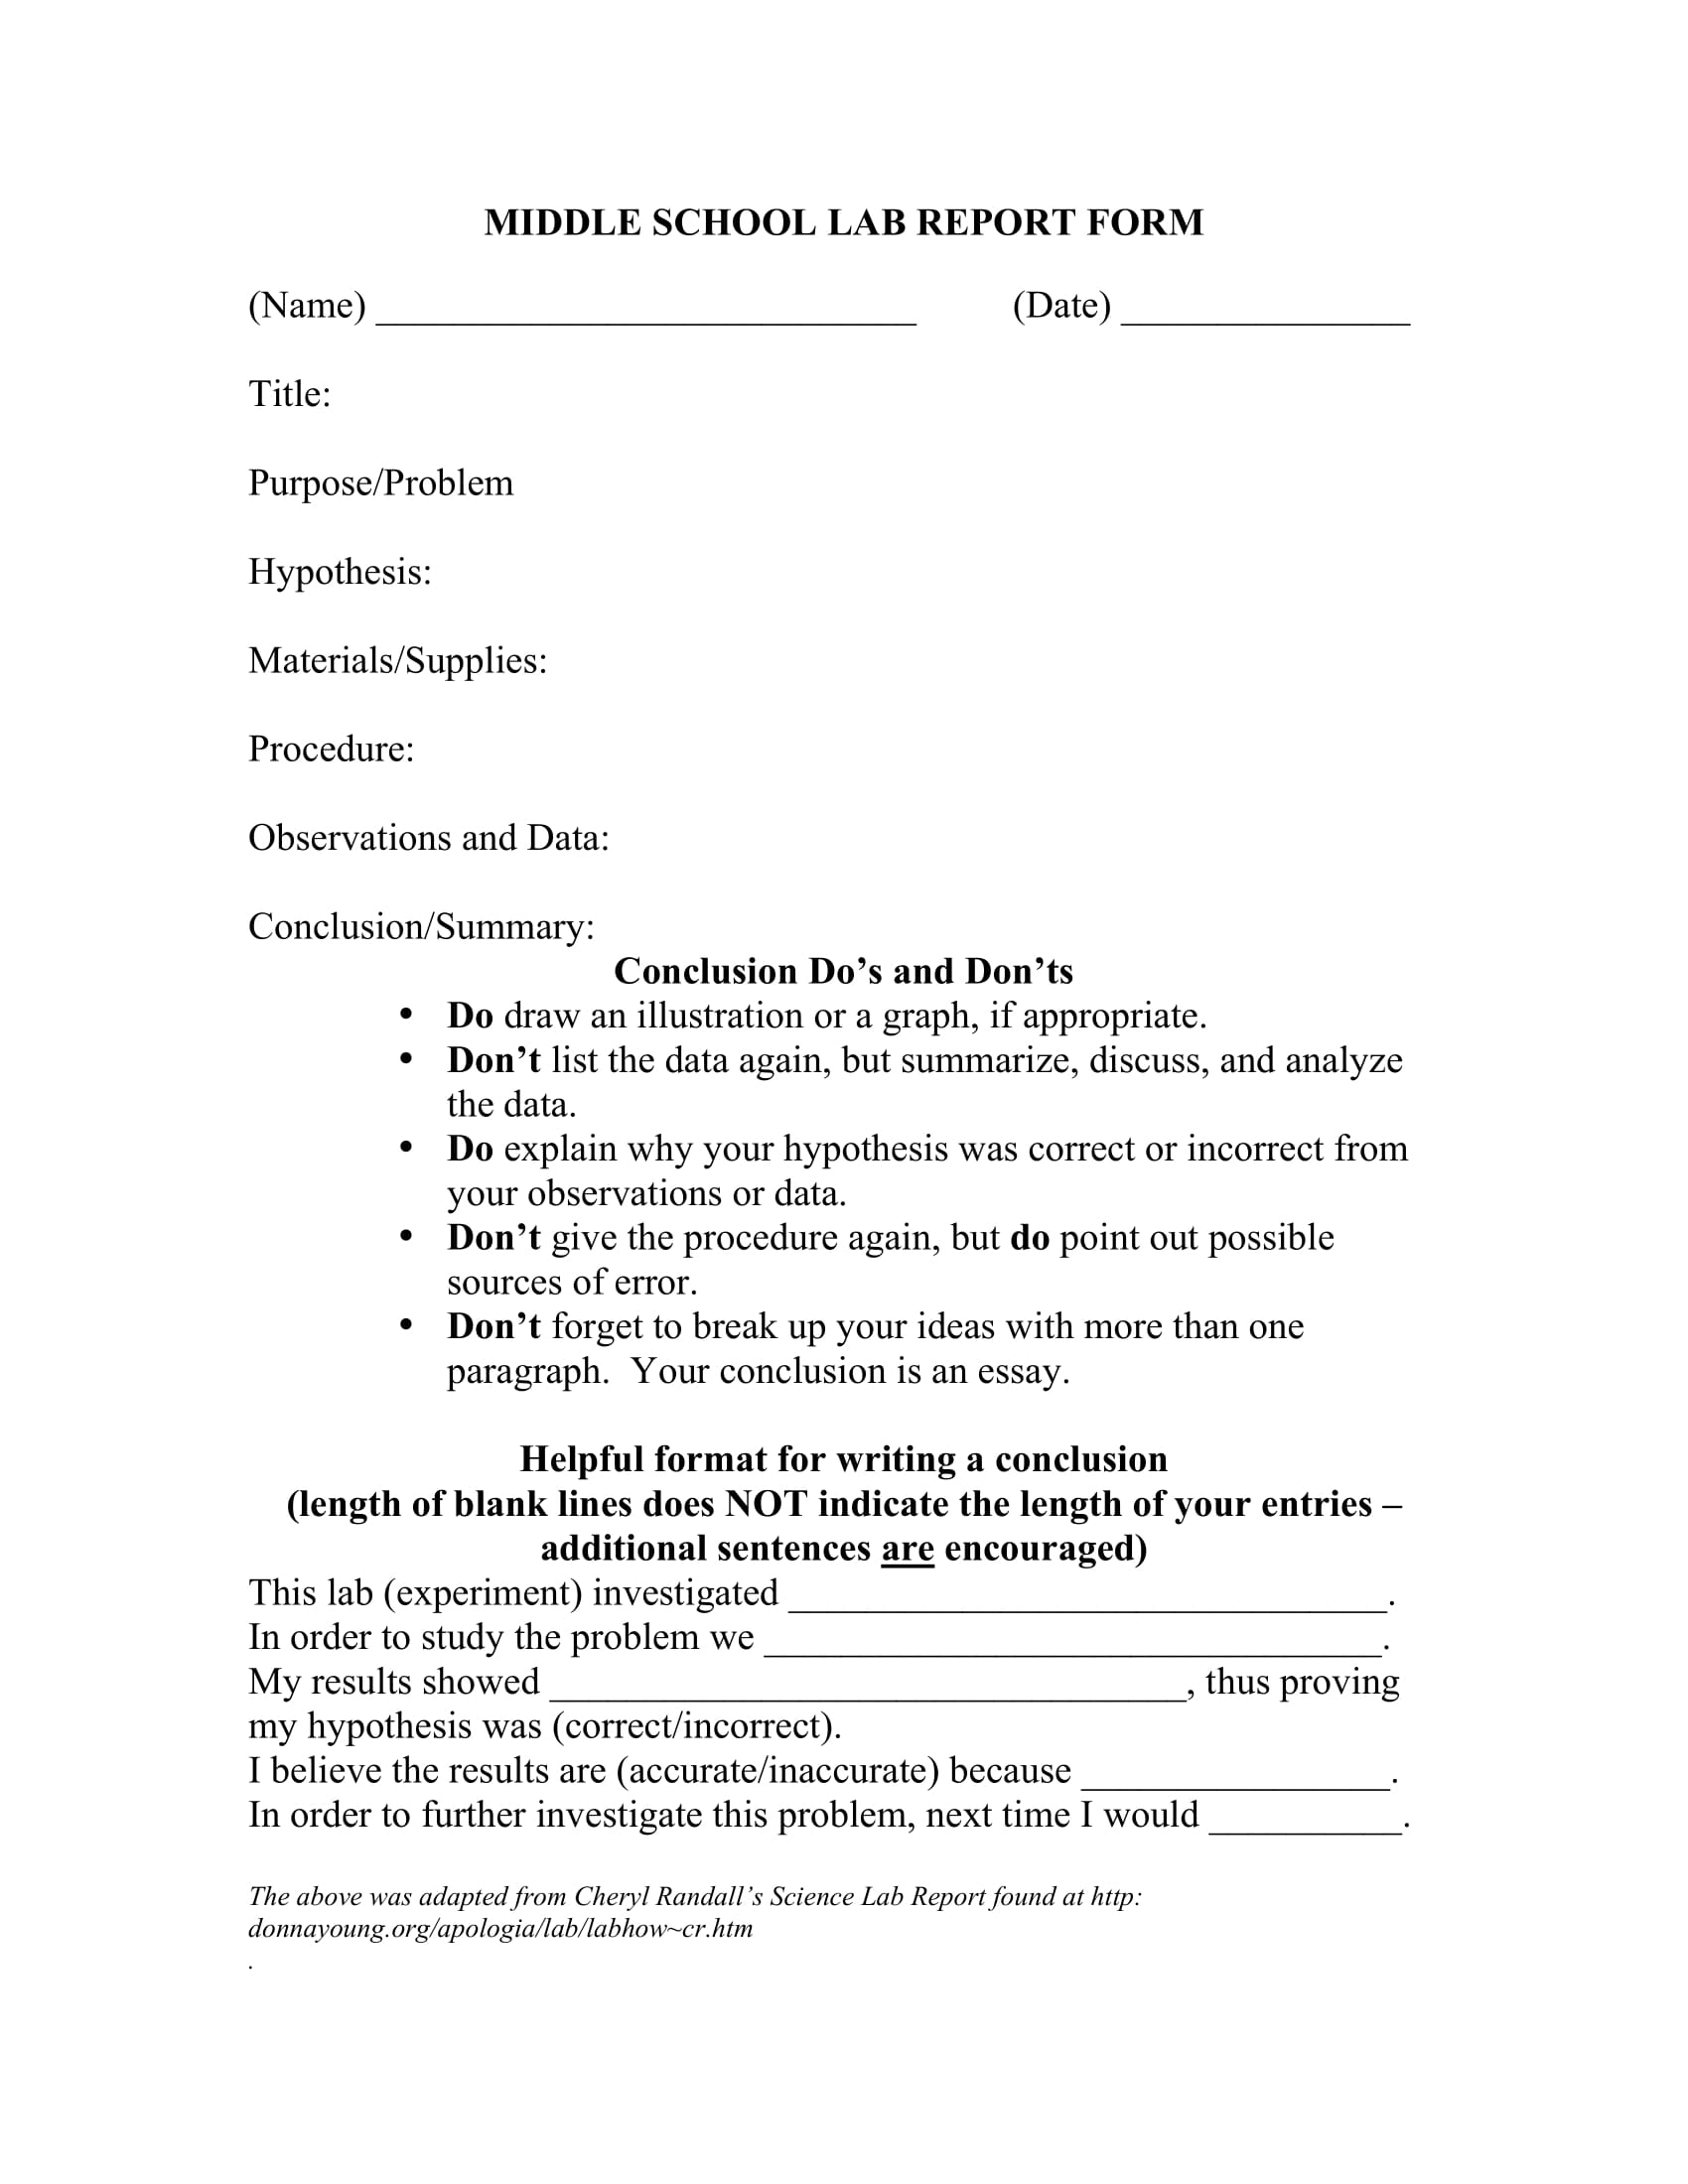 middle school lab report form 2